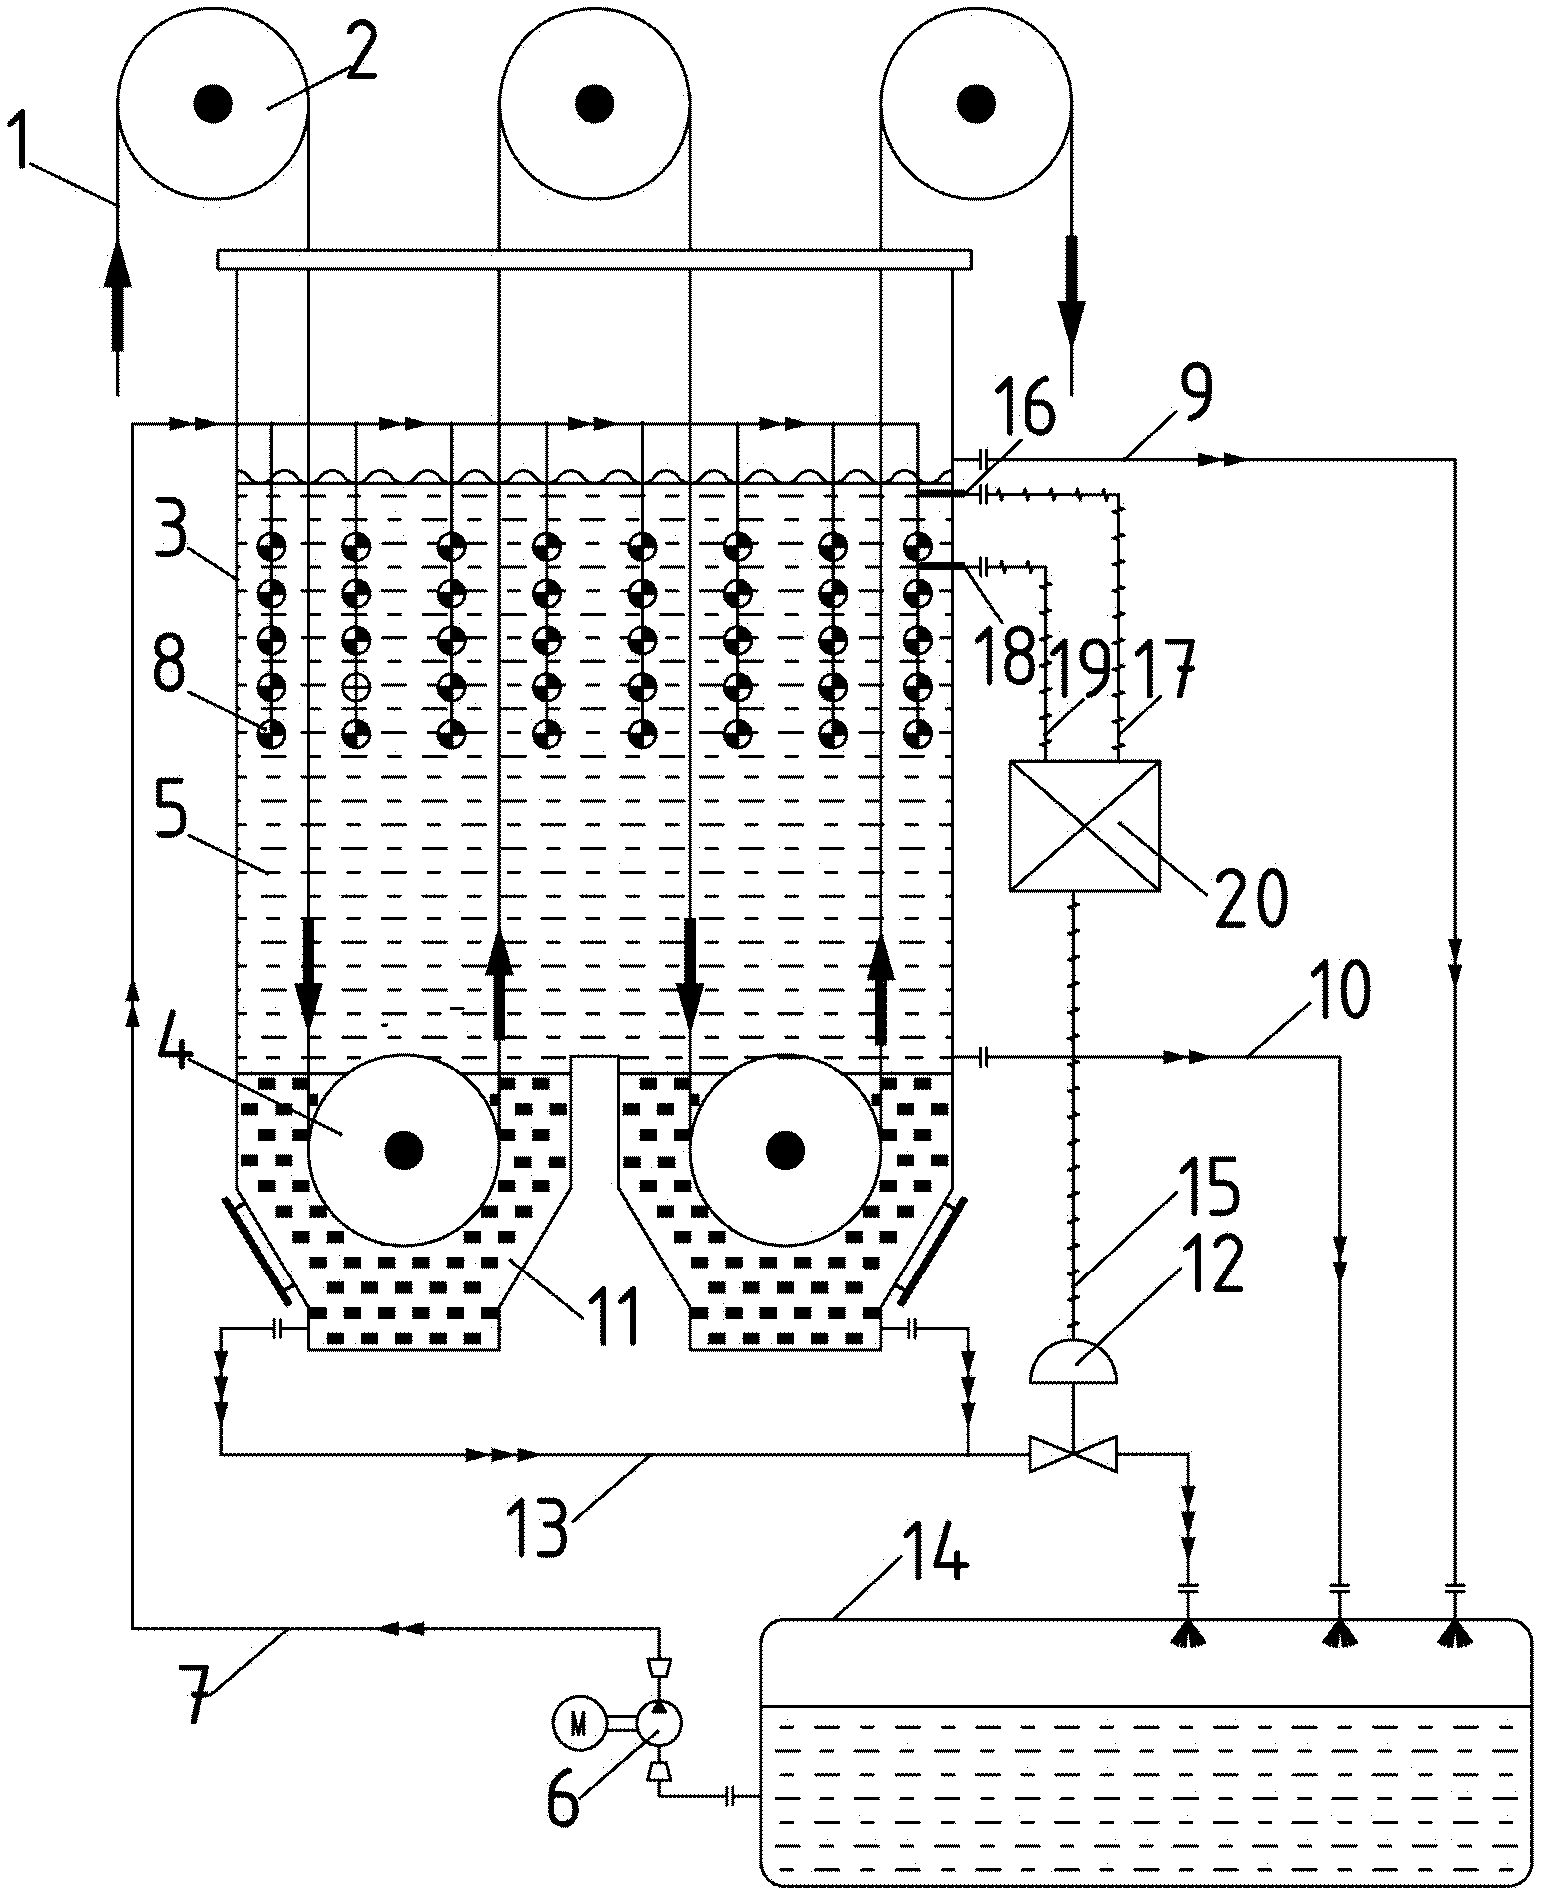 Sequential deslagging control device for soaking tanks and automatic deslagging soaking tank